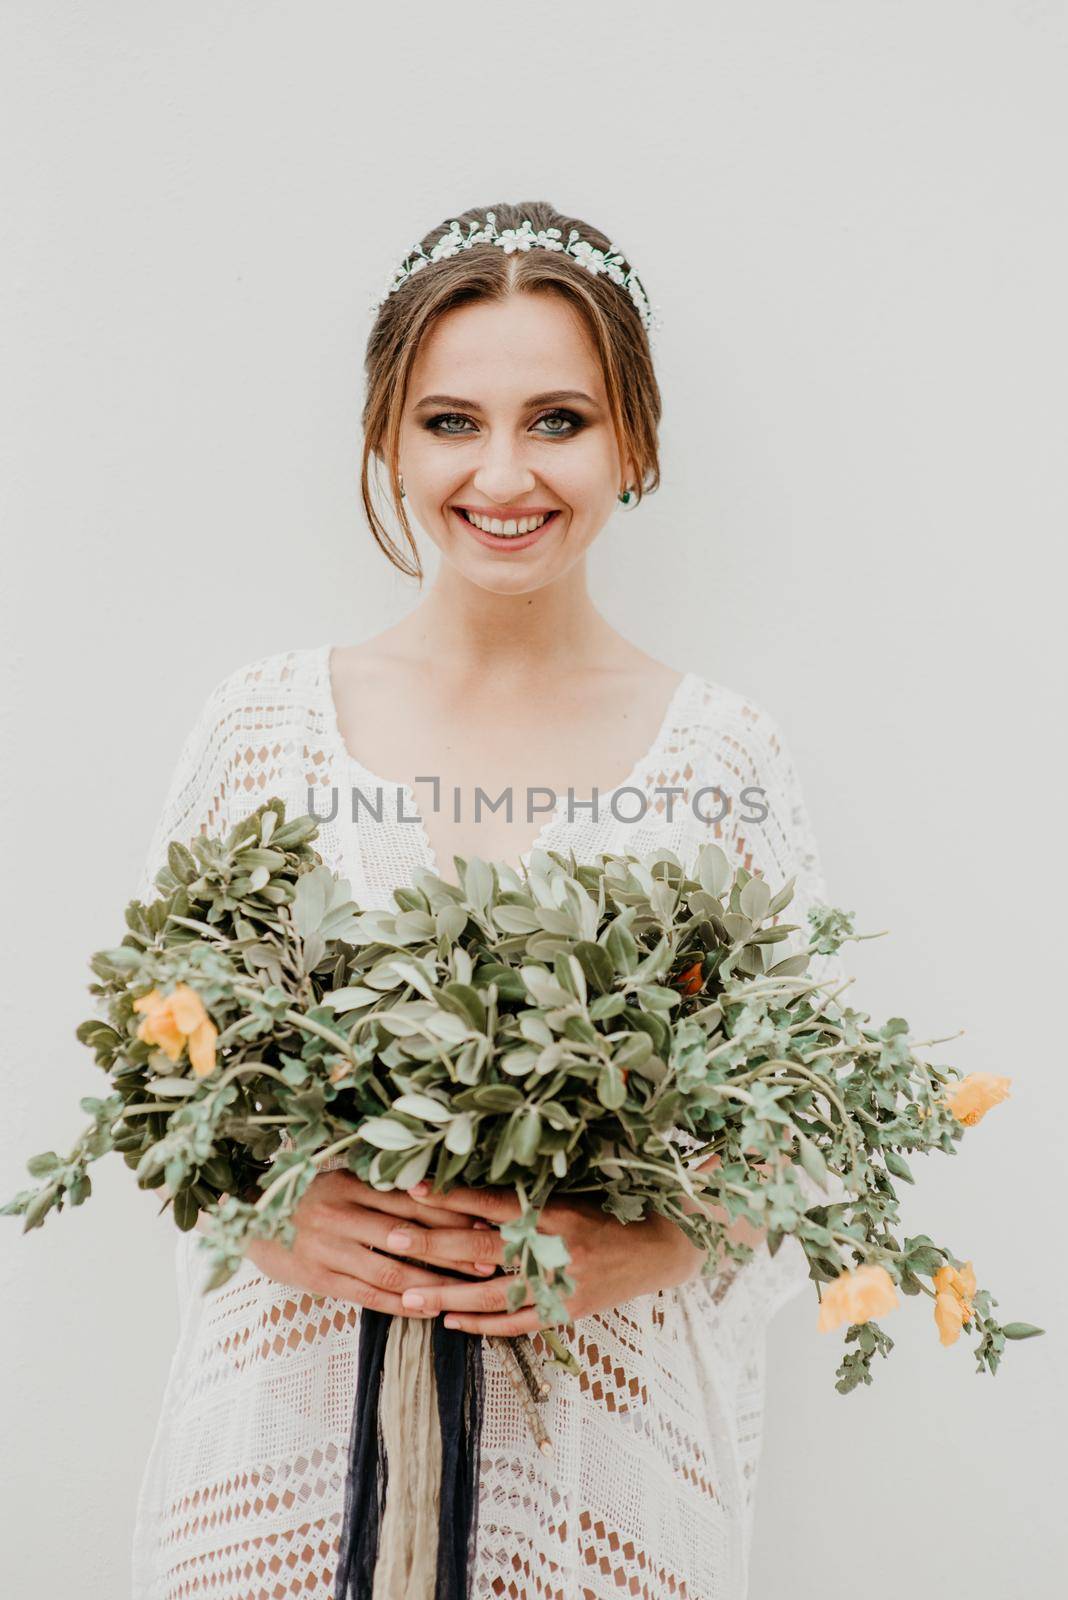 Young attractive bride with the bouquet of flowers.